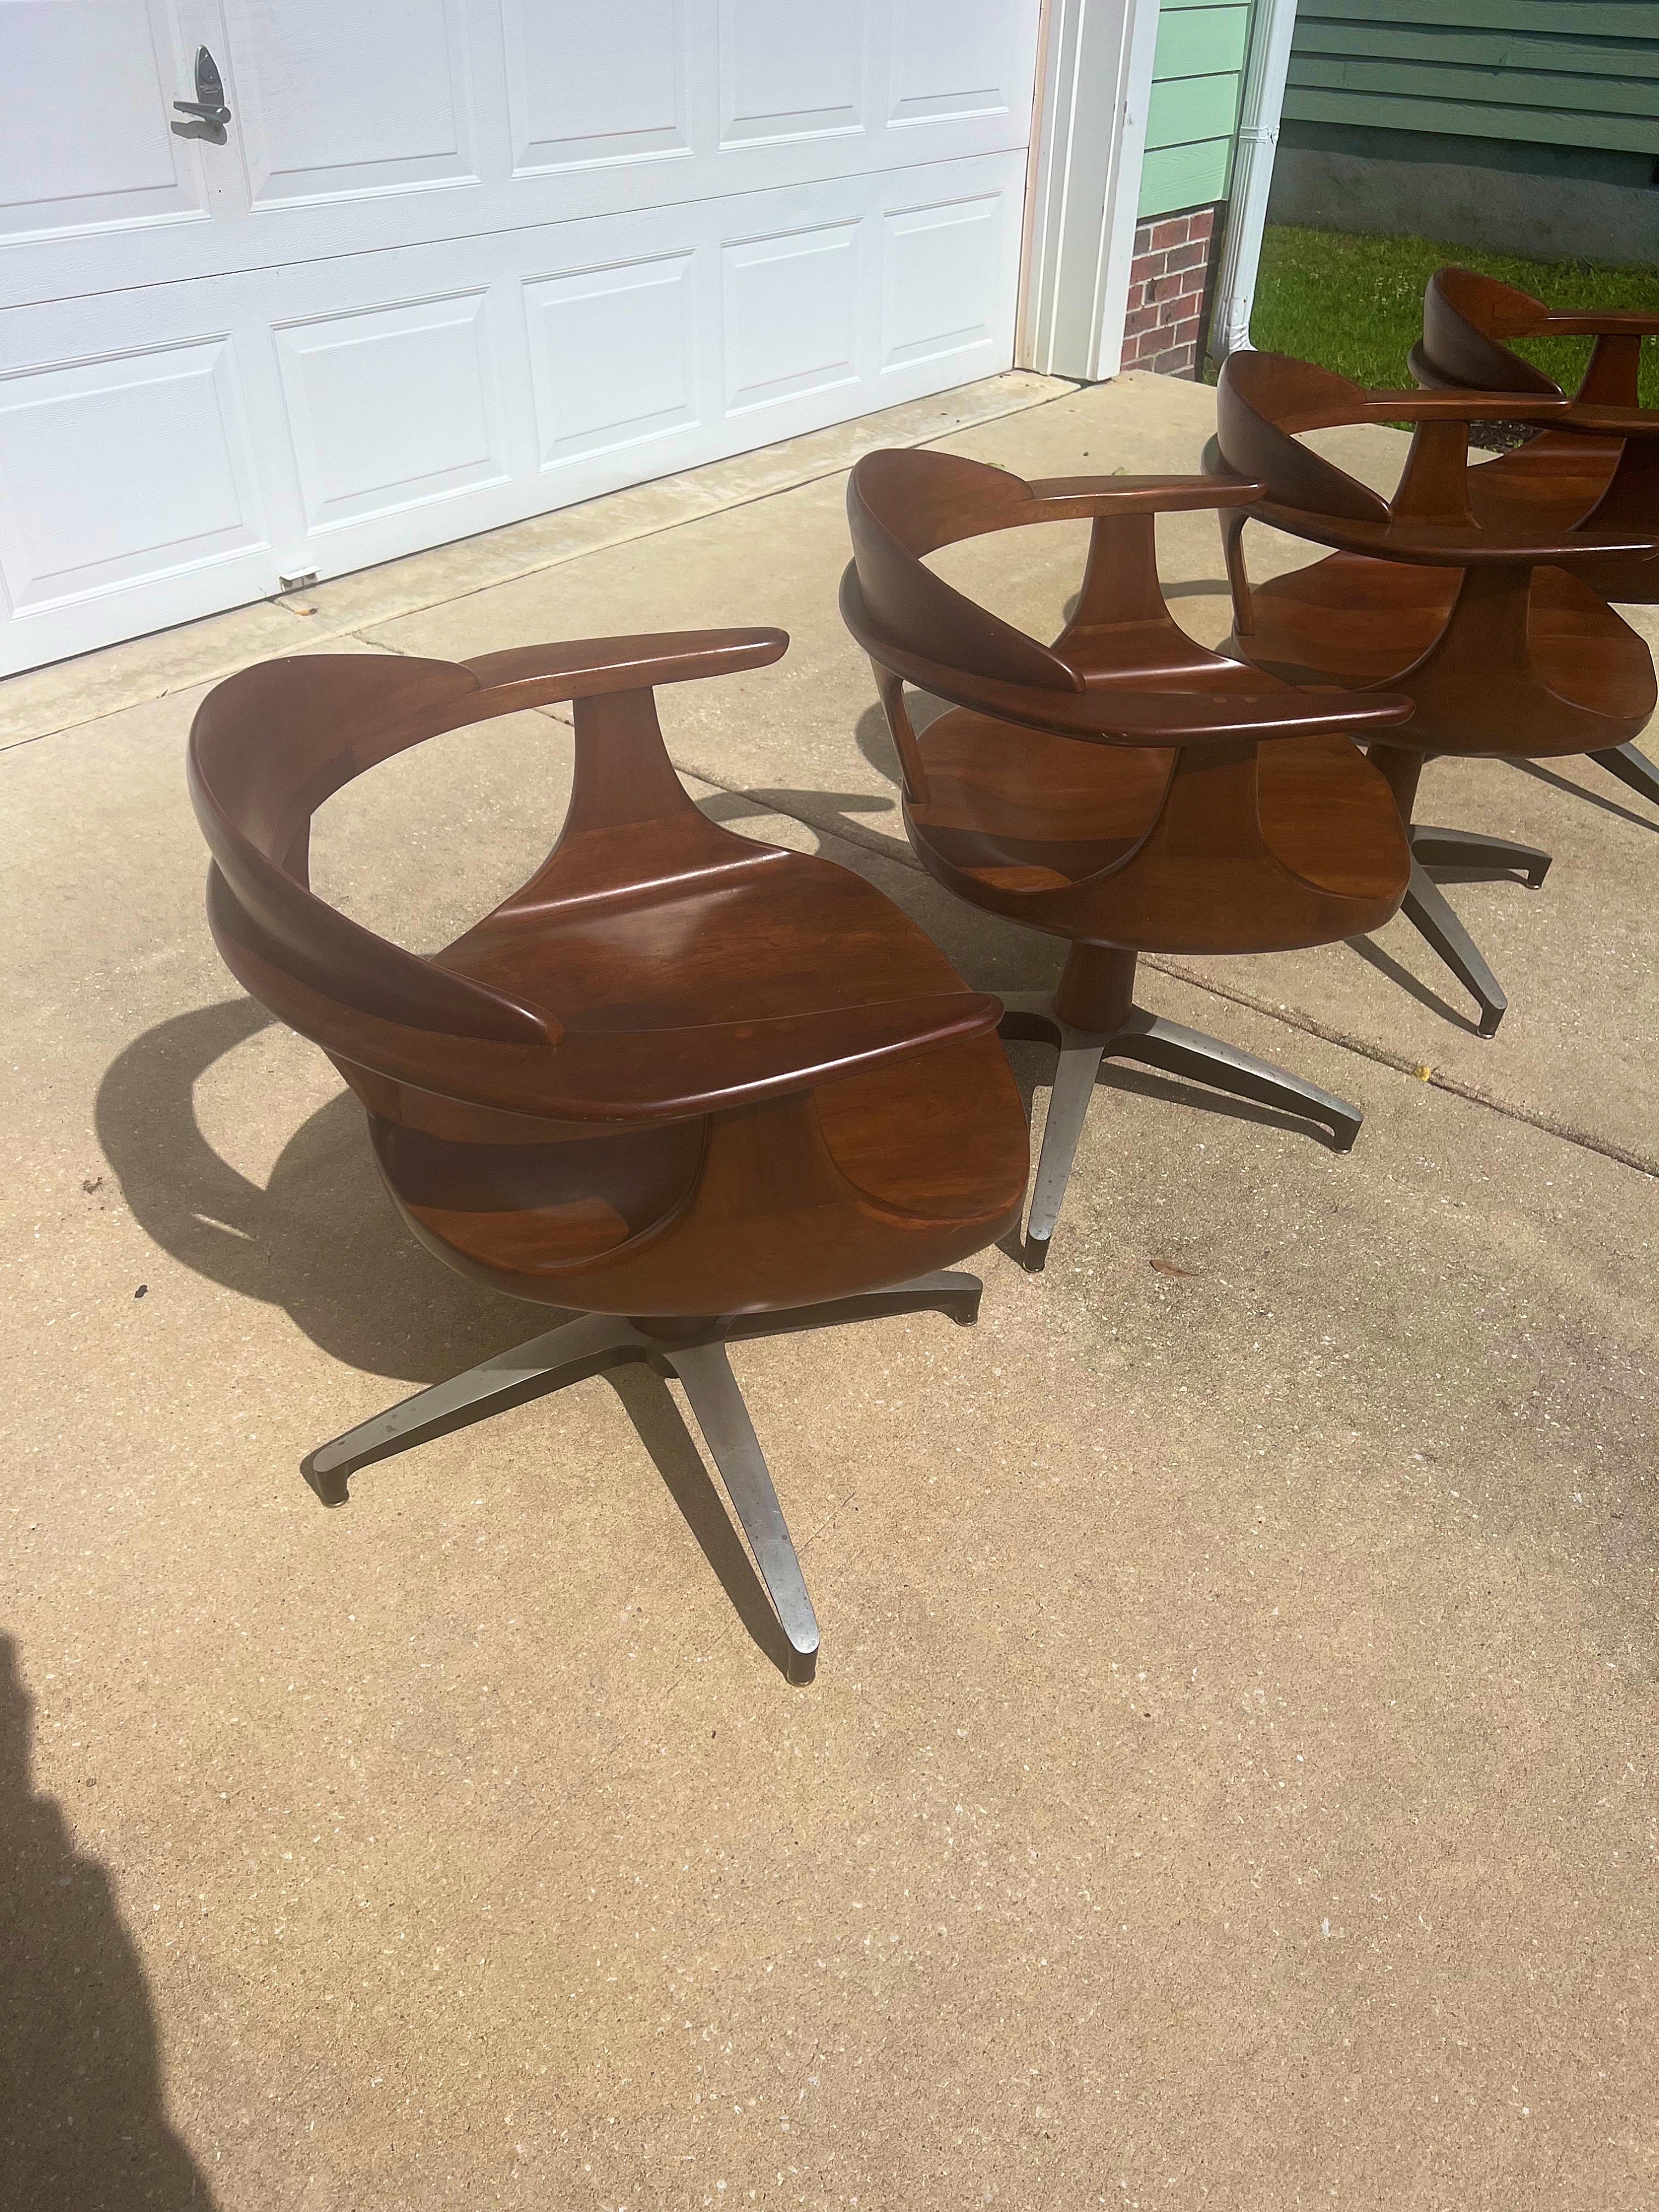 1960s Heywood Wakefield “Cliff House” Dining Table and Chairs, a Set of 5 In Good Condition For Sale In Charleston, SC